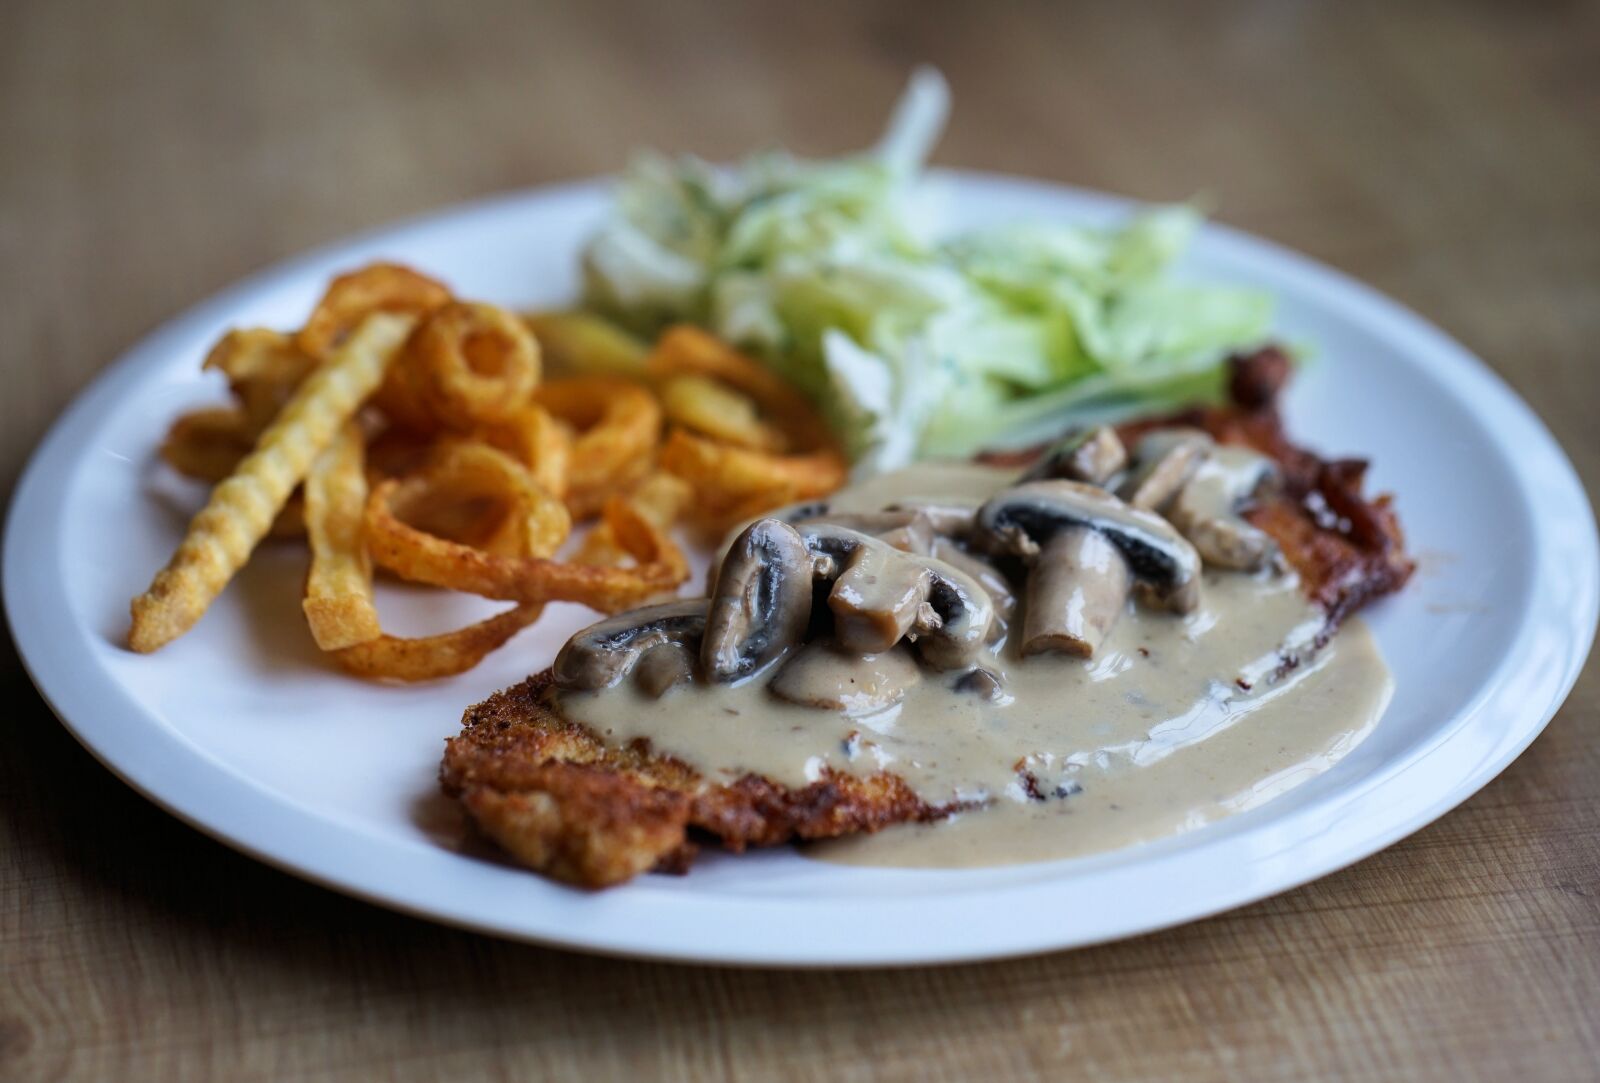 ZEISS Batis 85mm F1.8 sample photo. Schnitzel, salad, french photography